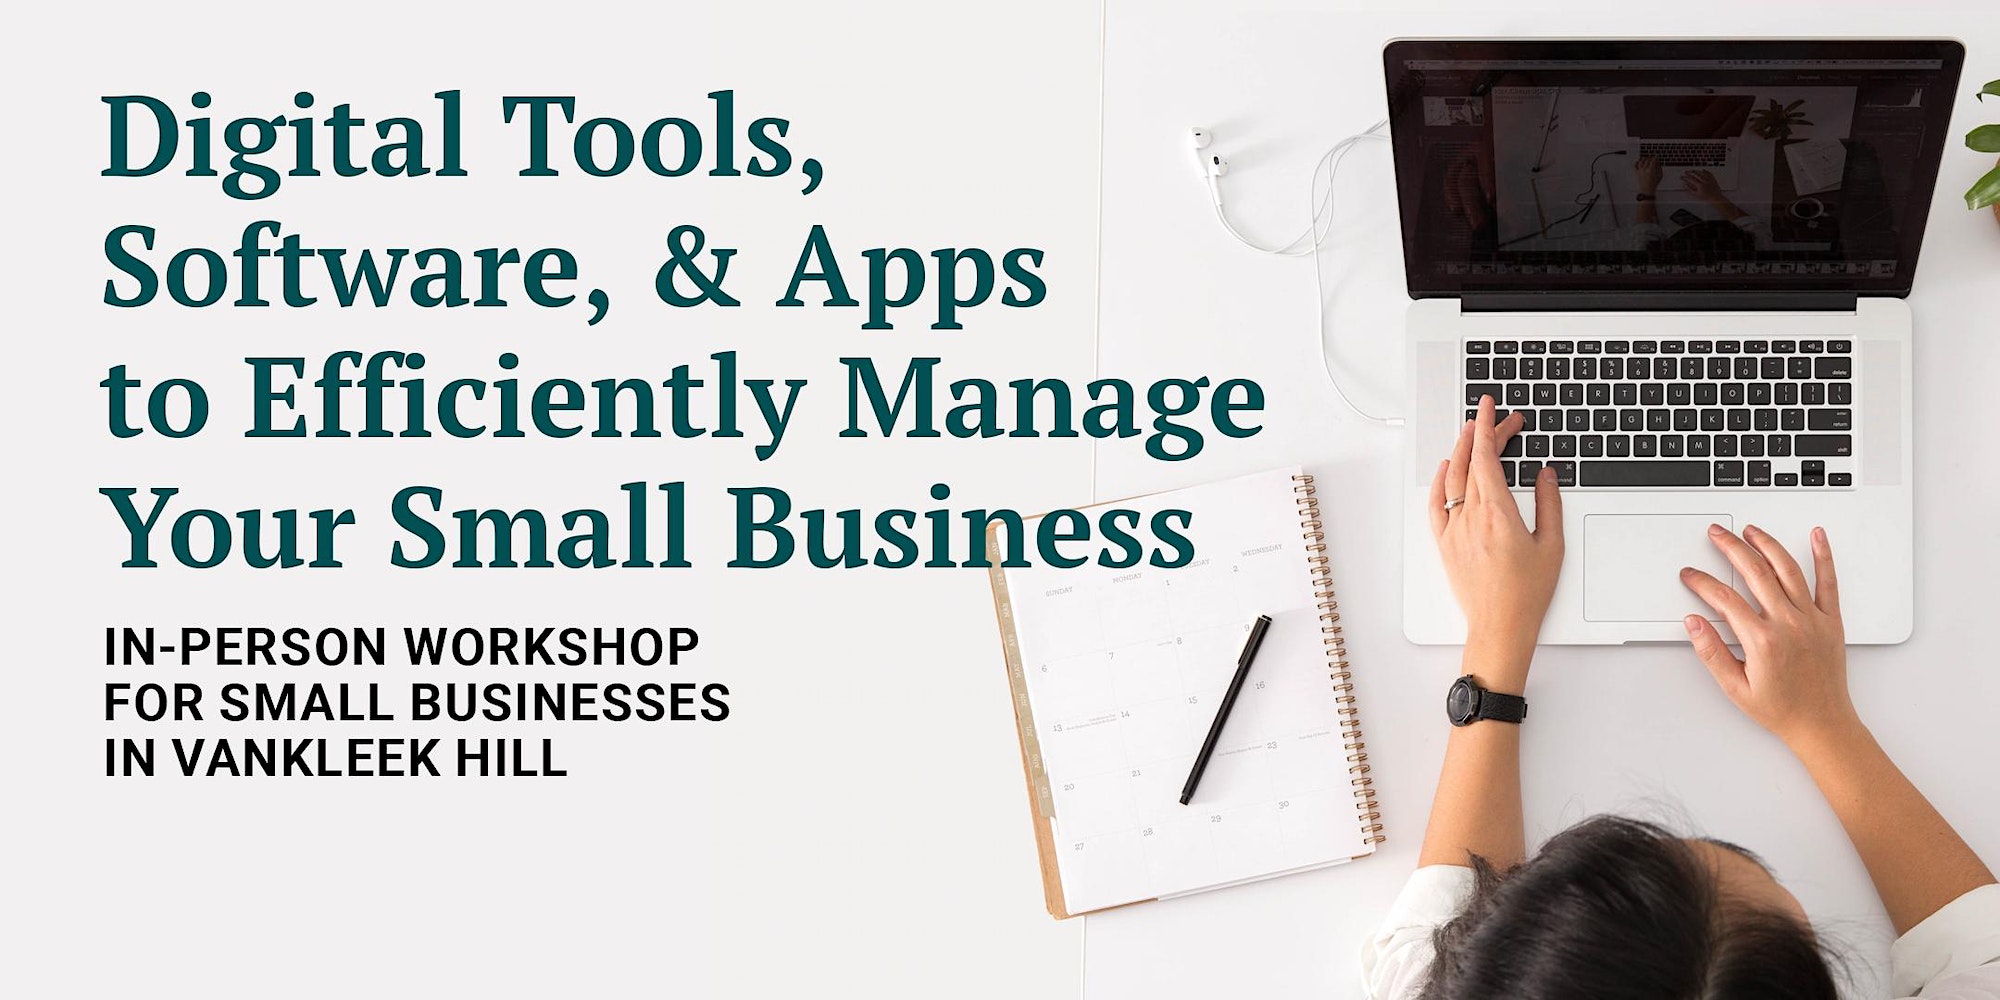 Digital tools, software, & apps to efficiently manage your small business. In-person workshop for small businesses in Vankleek Hill.